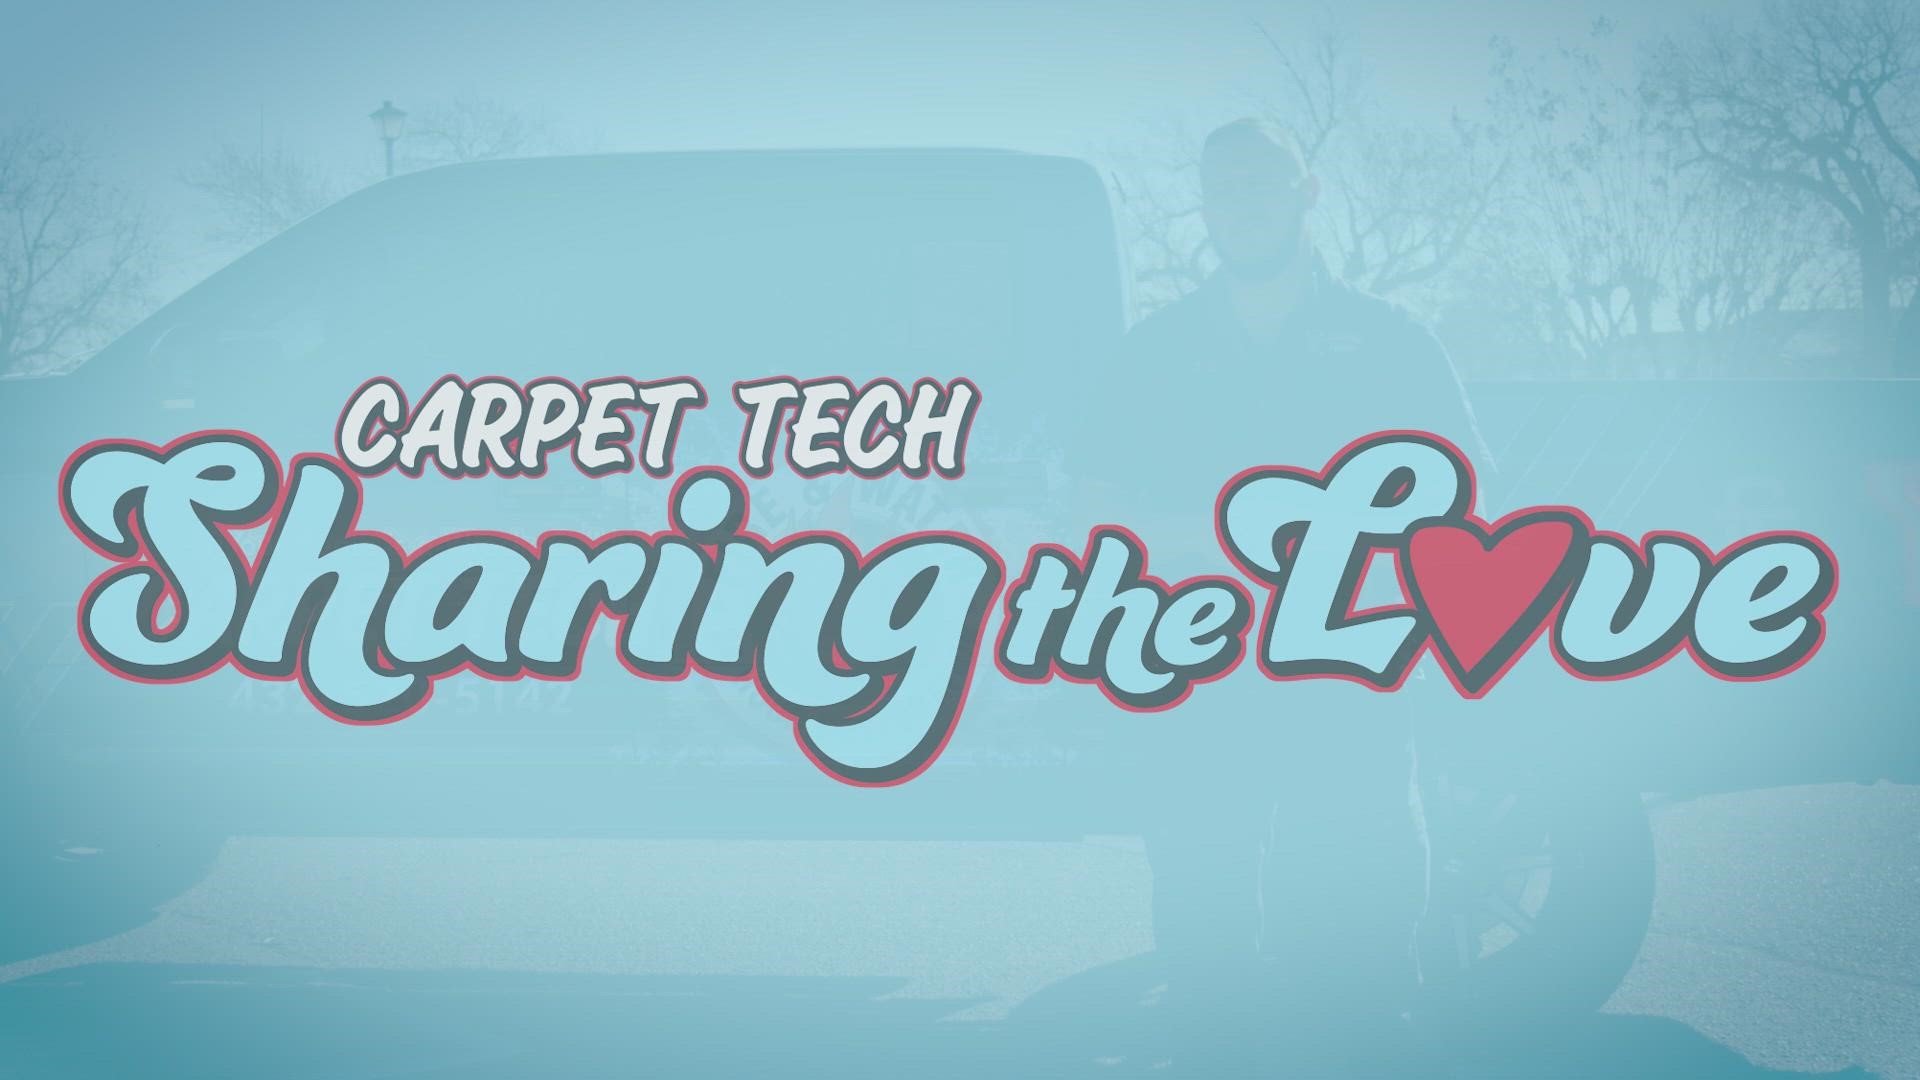 You can nominate an organization or nonprofit to help Carpet Tech share the love.